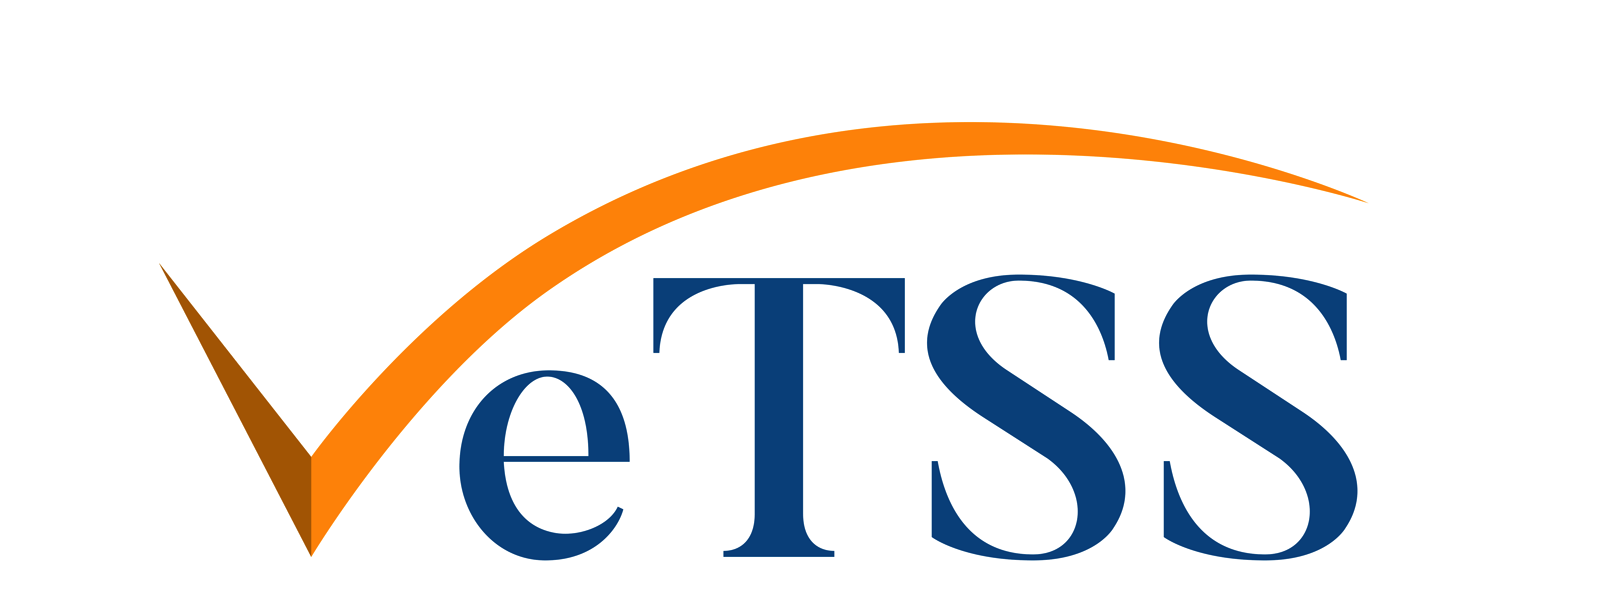 VeTSS (Research Institute in Automated Program Analysis and Verification)